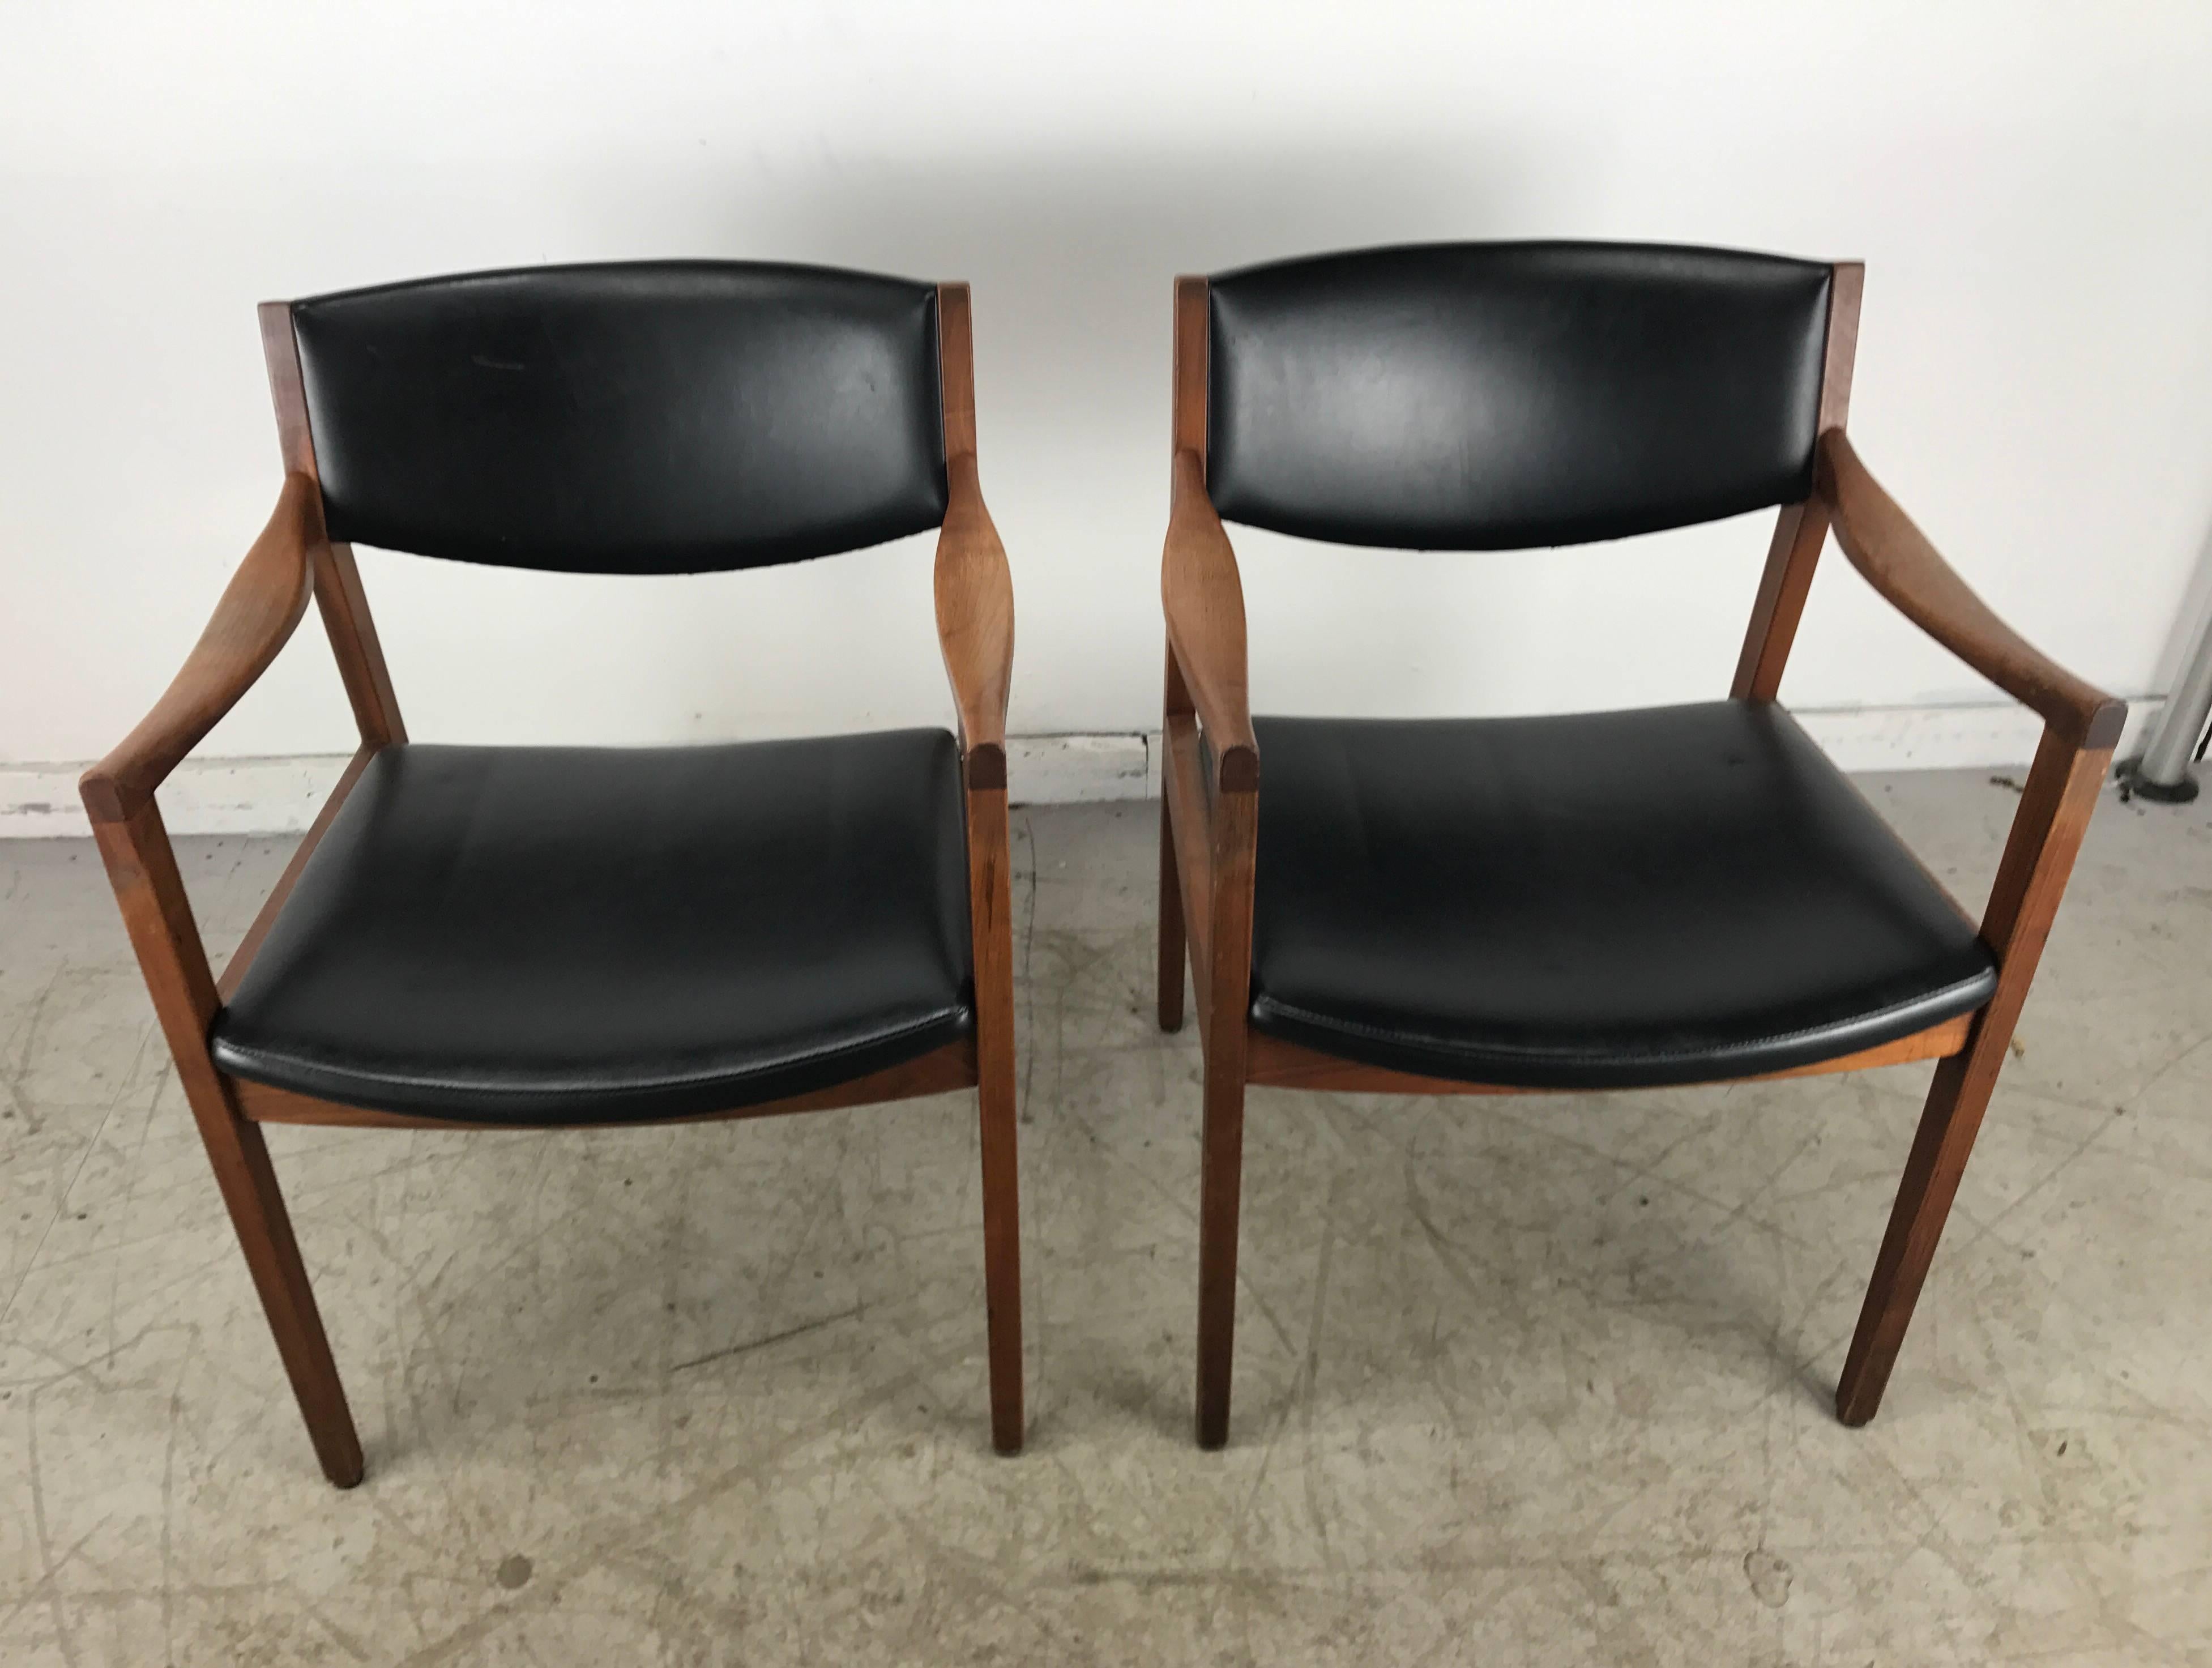 American Stunning Pair of Modernist Oiled Walnut and Black Armchairs by Gunlocke